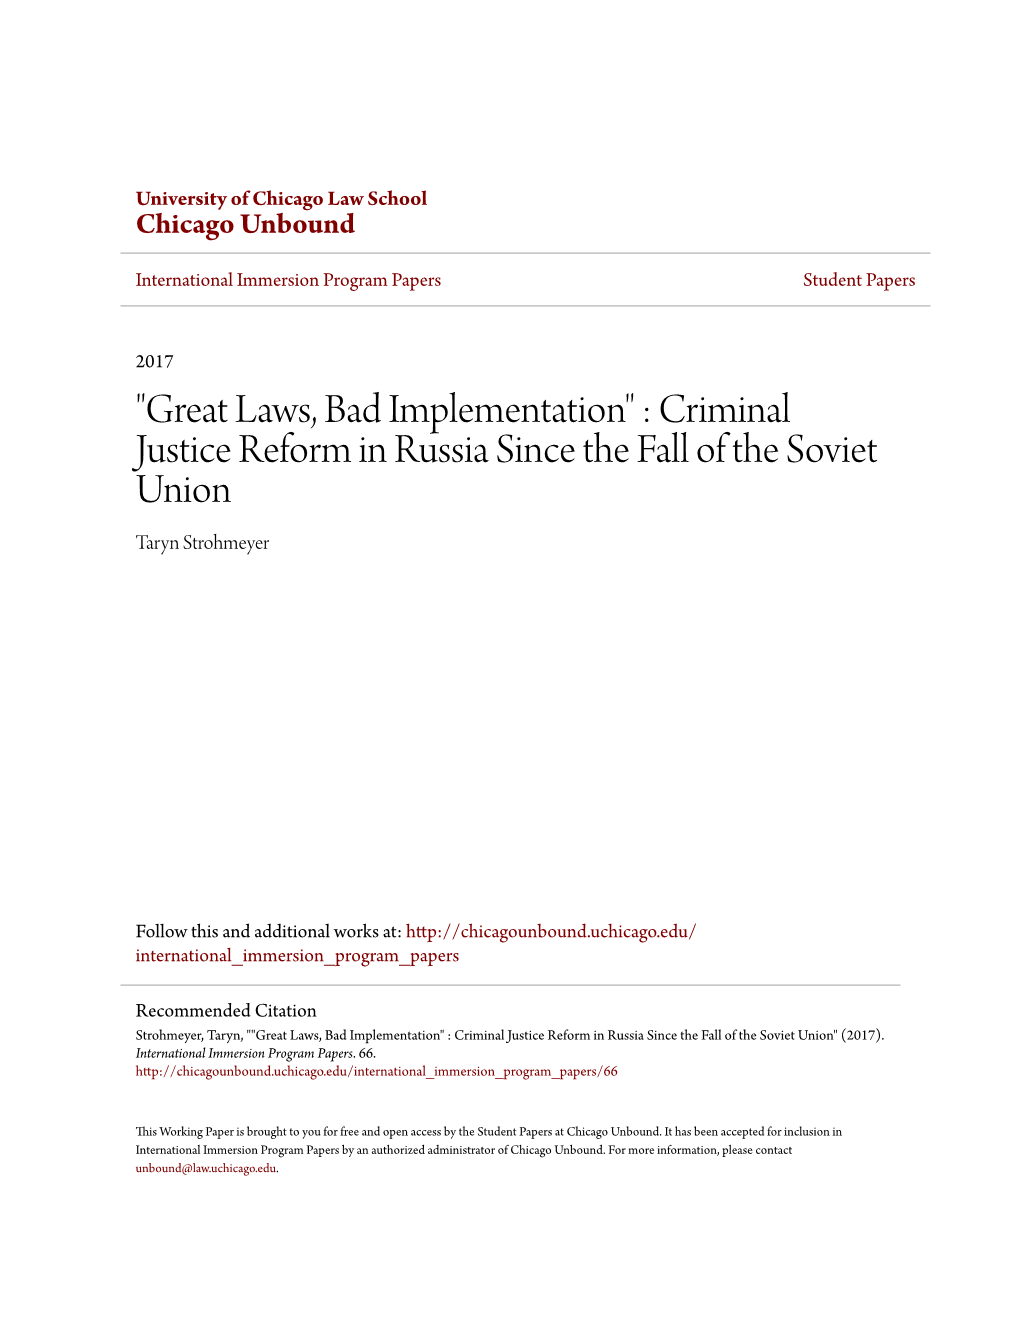 Criminal Justice Reform in Russia Since the Fall of the Soviet Union Taryn Strohmeyer